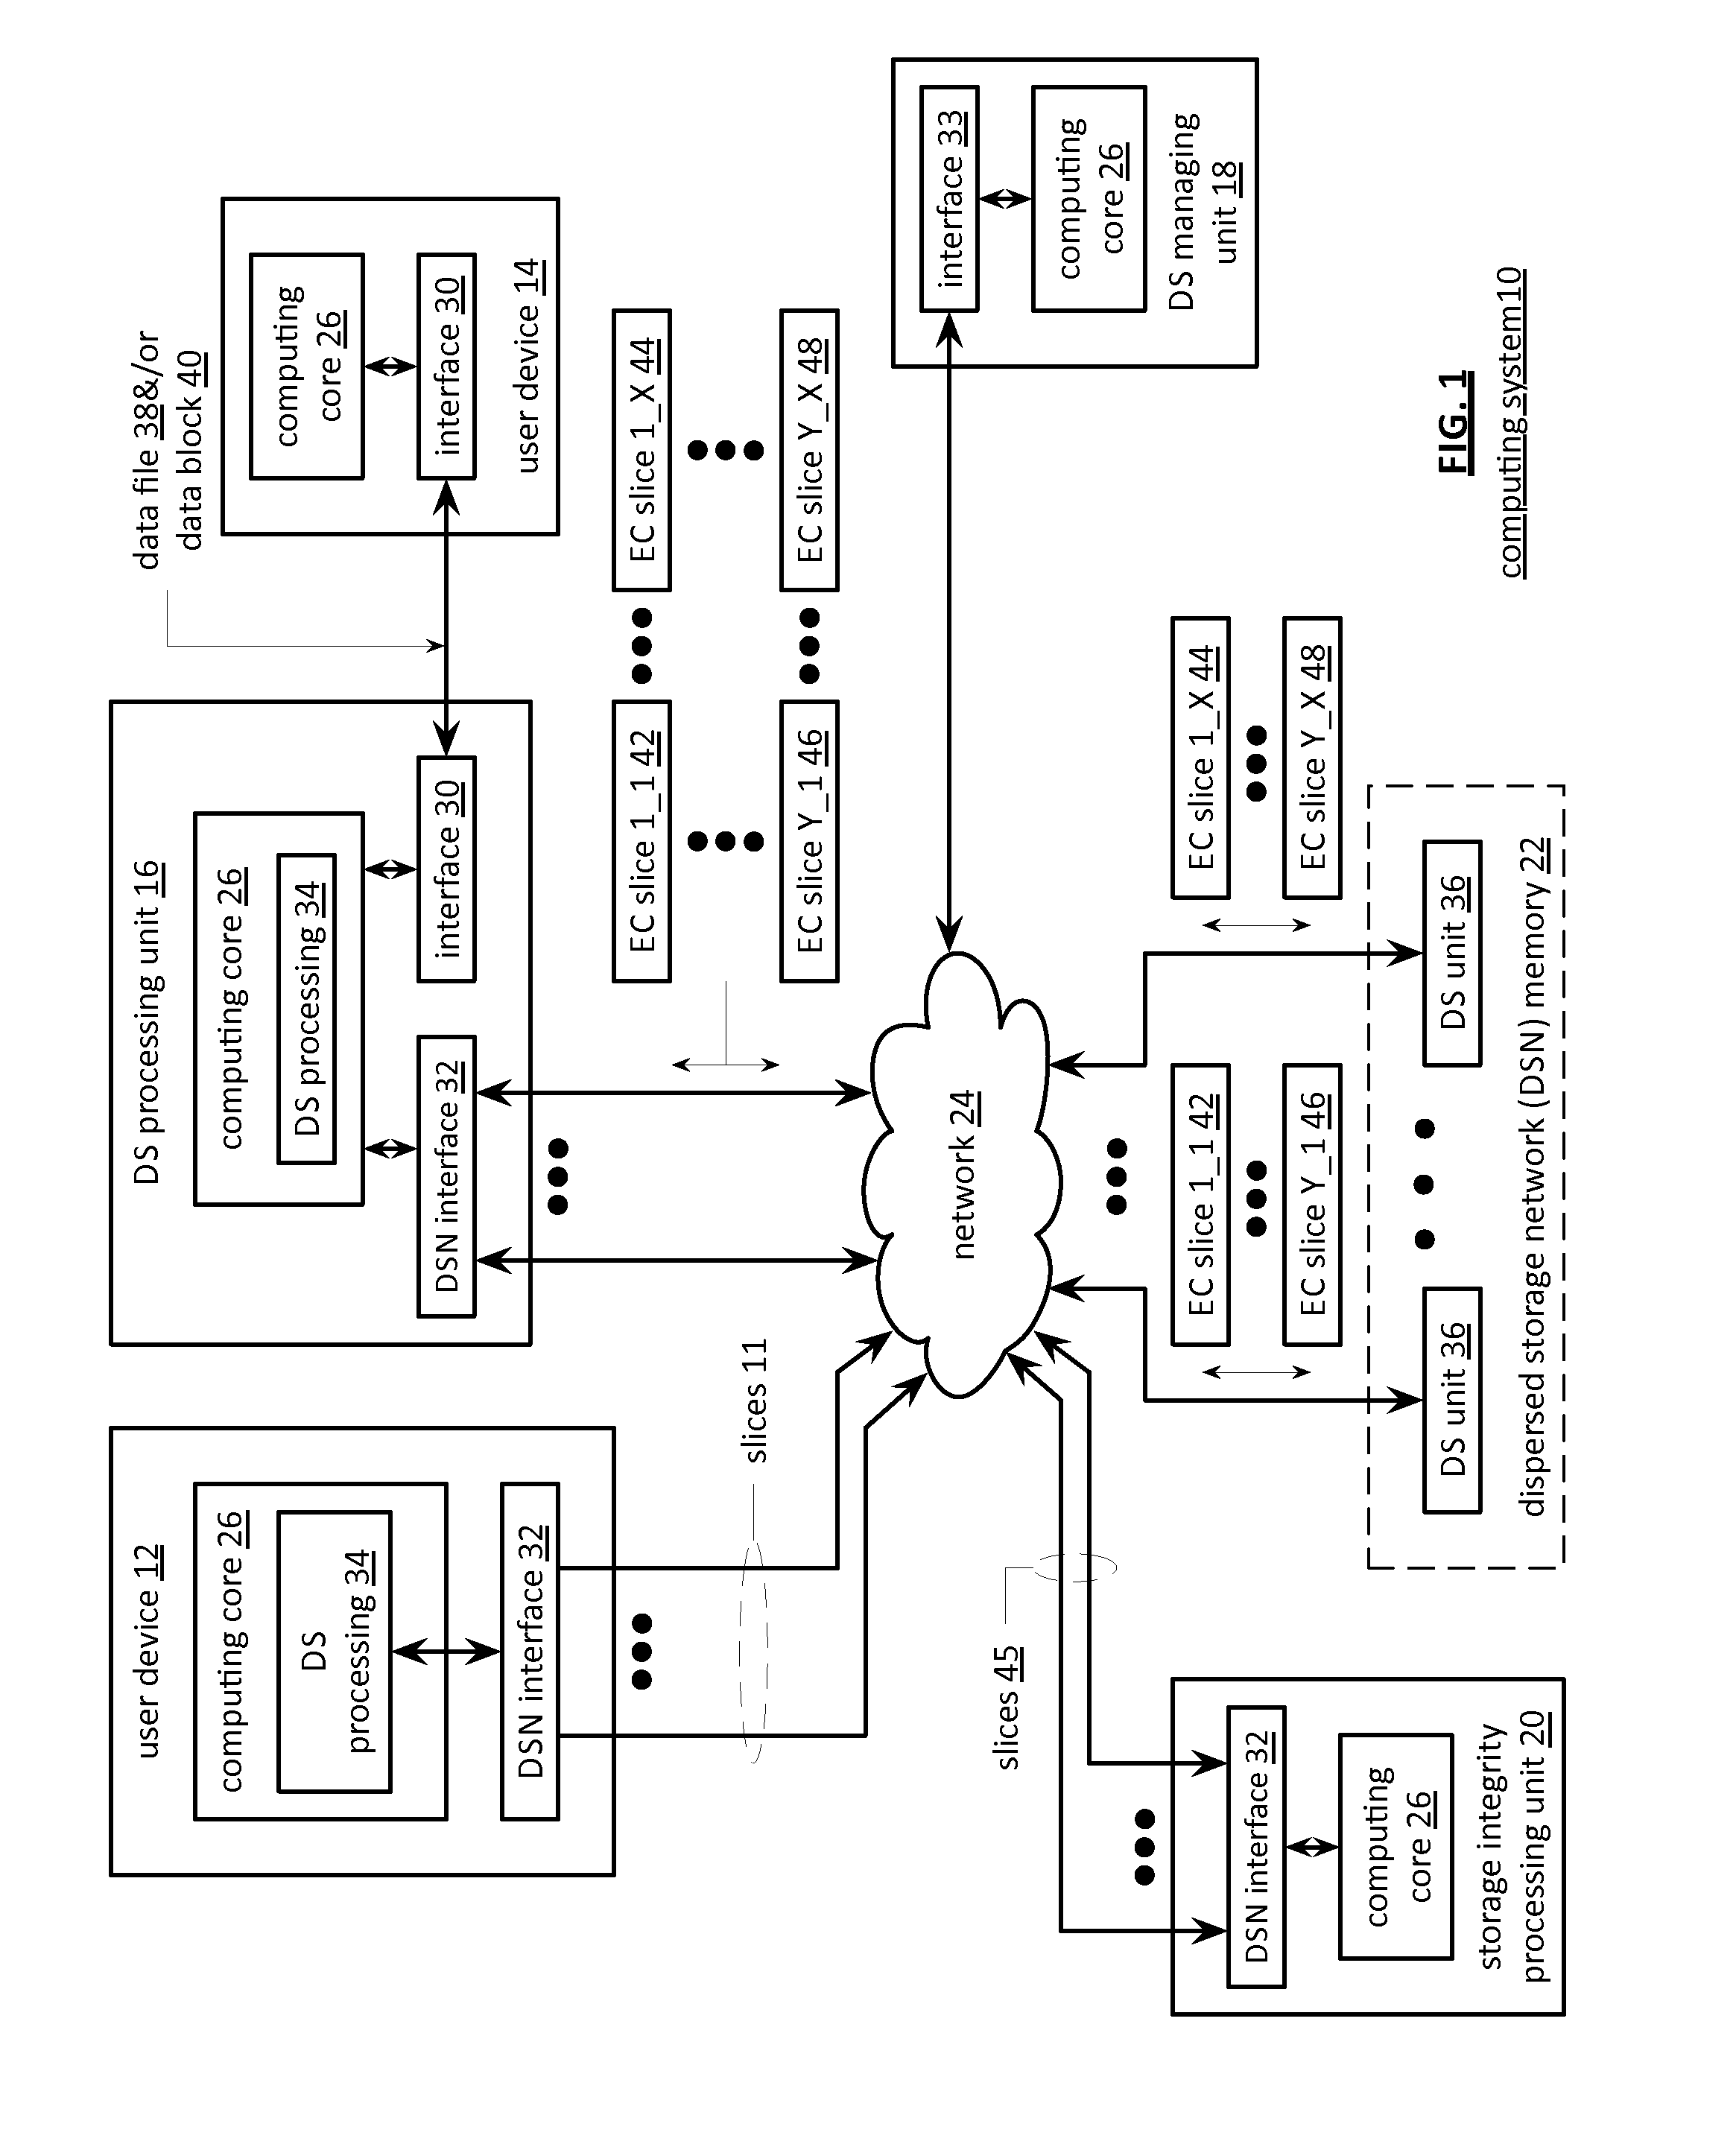 Configuring a generic computing device utilizing specific computing device operation information